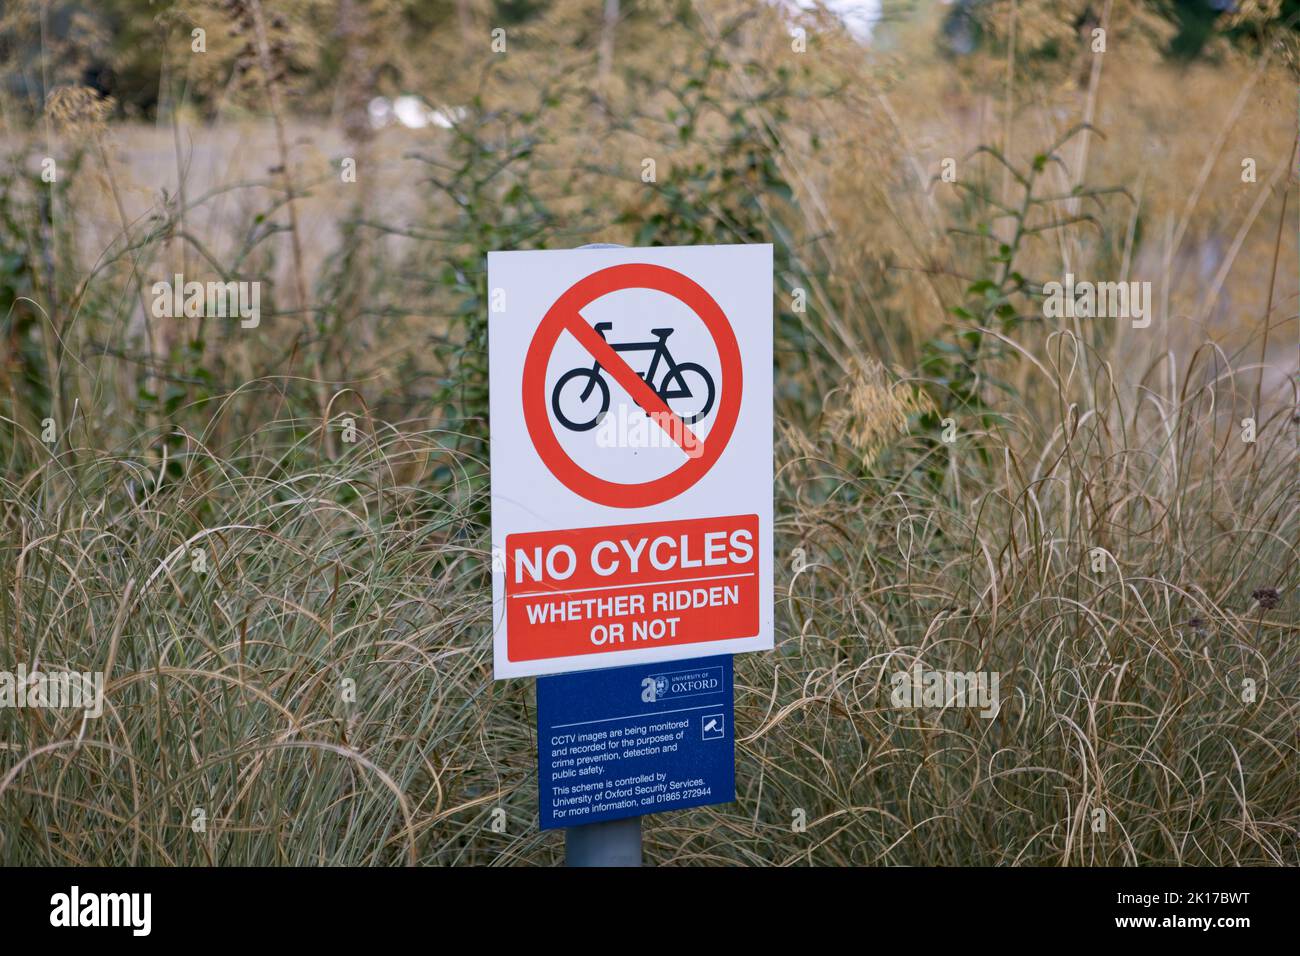 Park in Oxford owned by the university: No cycles whether ridden or not Stock Photo